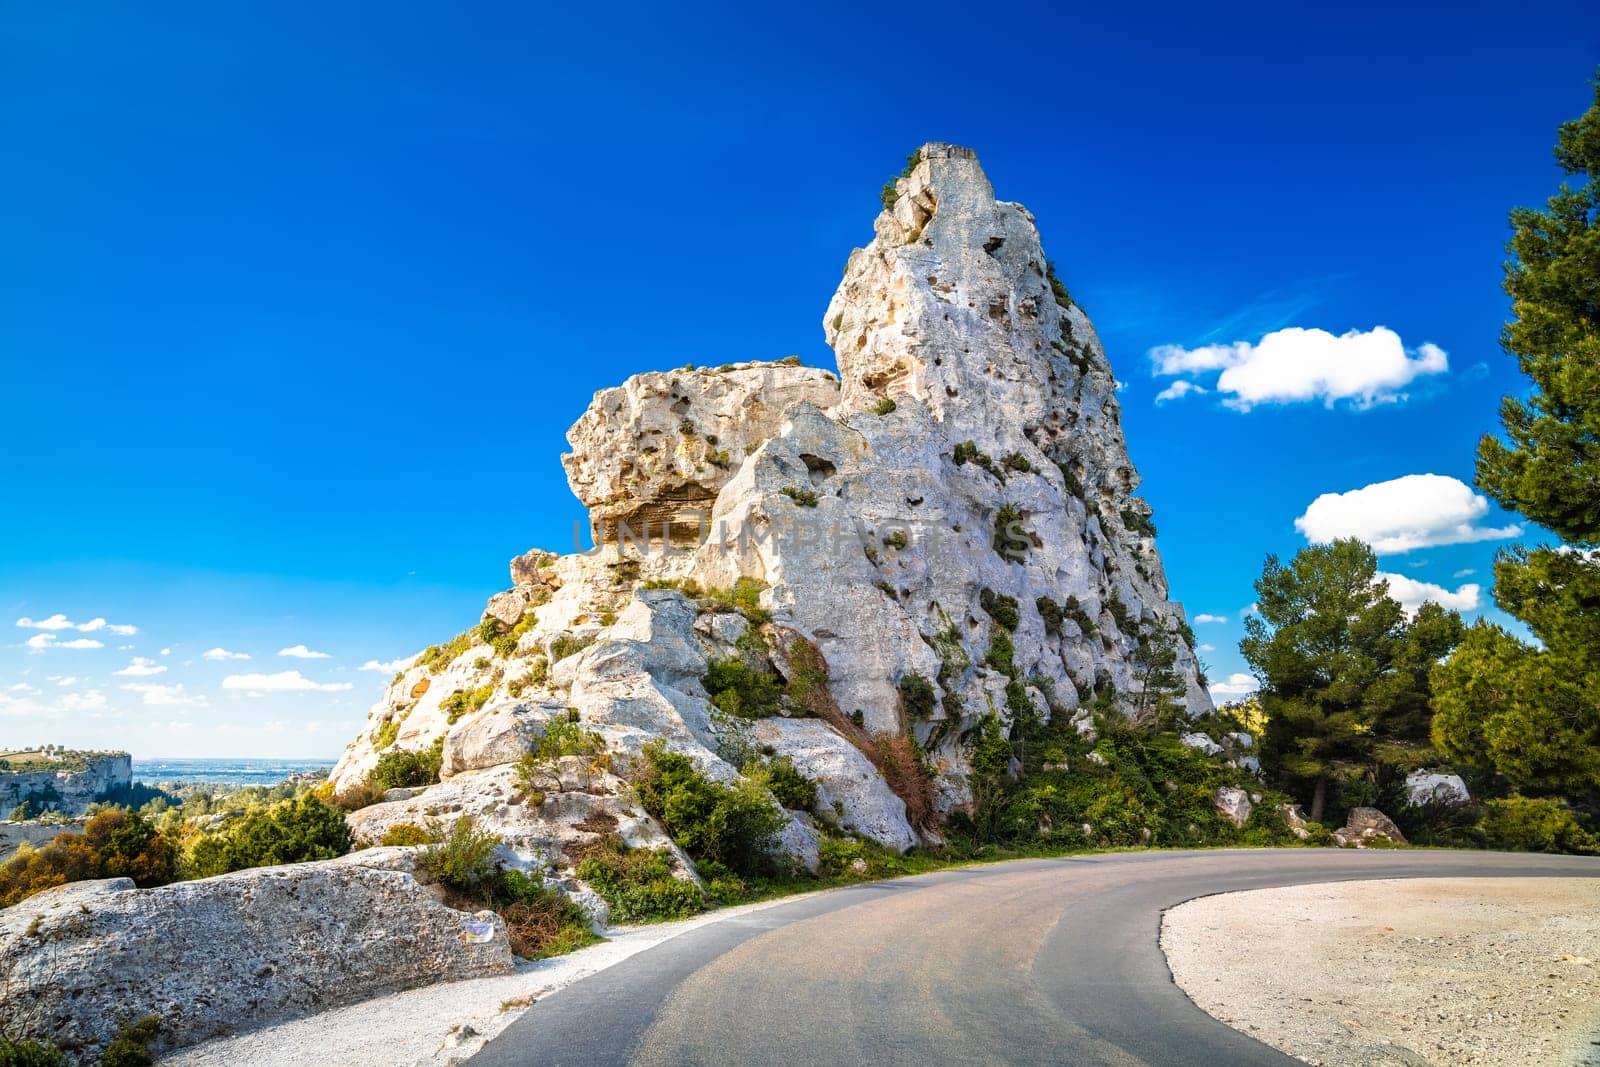 Les Baux de Provence scenic mountain road and rock view by xbrchx